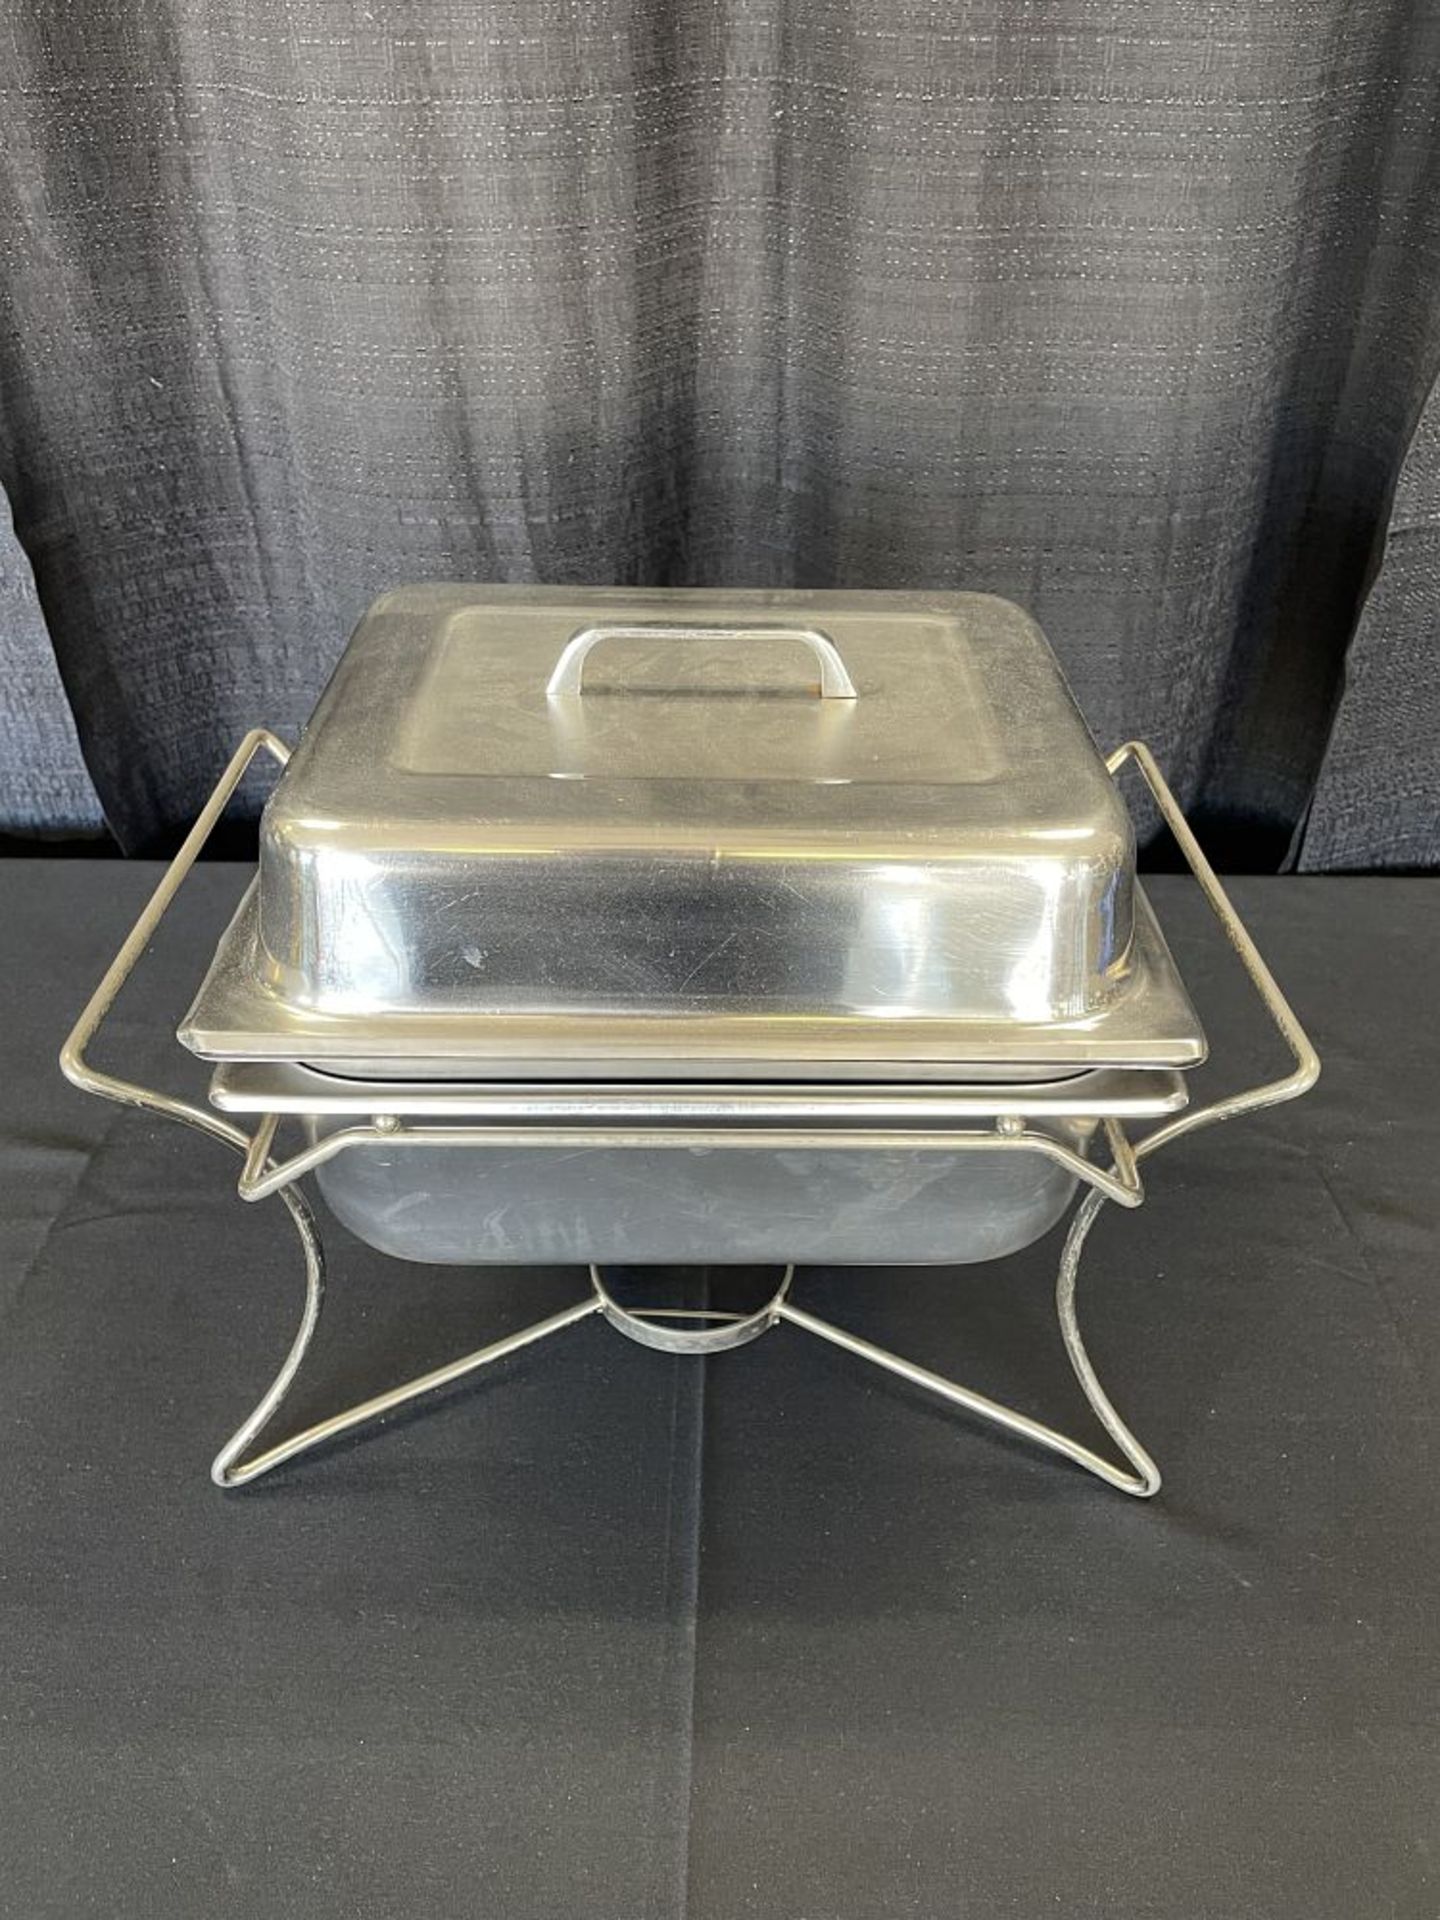 4qt Sq Chafer w/ silver handle & stand